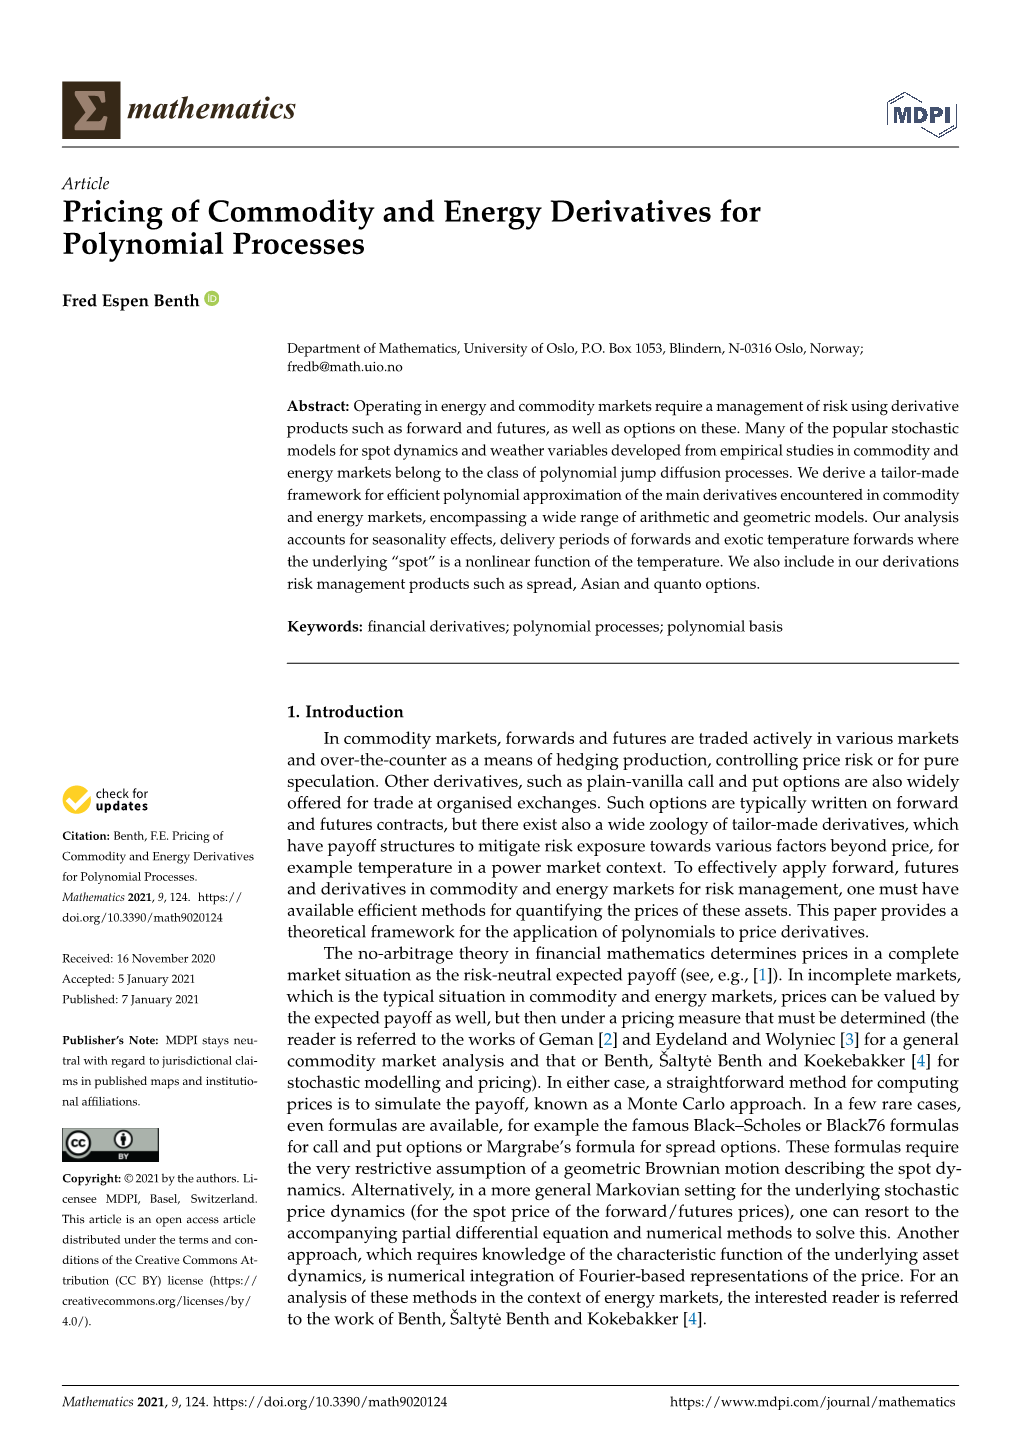 Pricing of Commodity and Energy Derivatives for Polynomial Processes